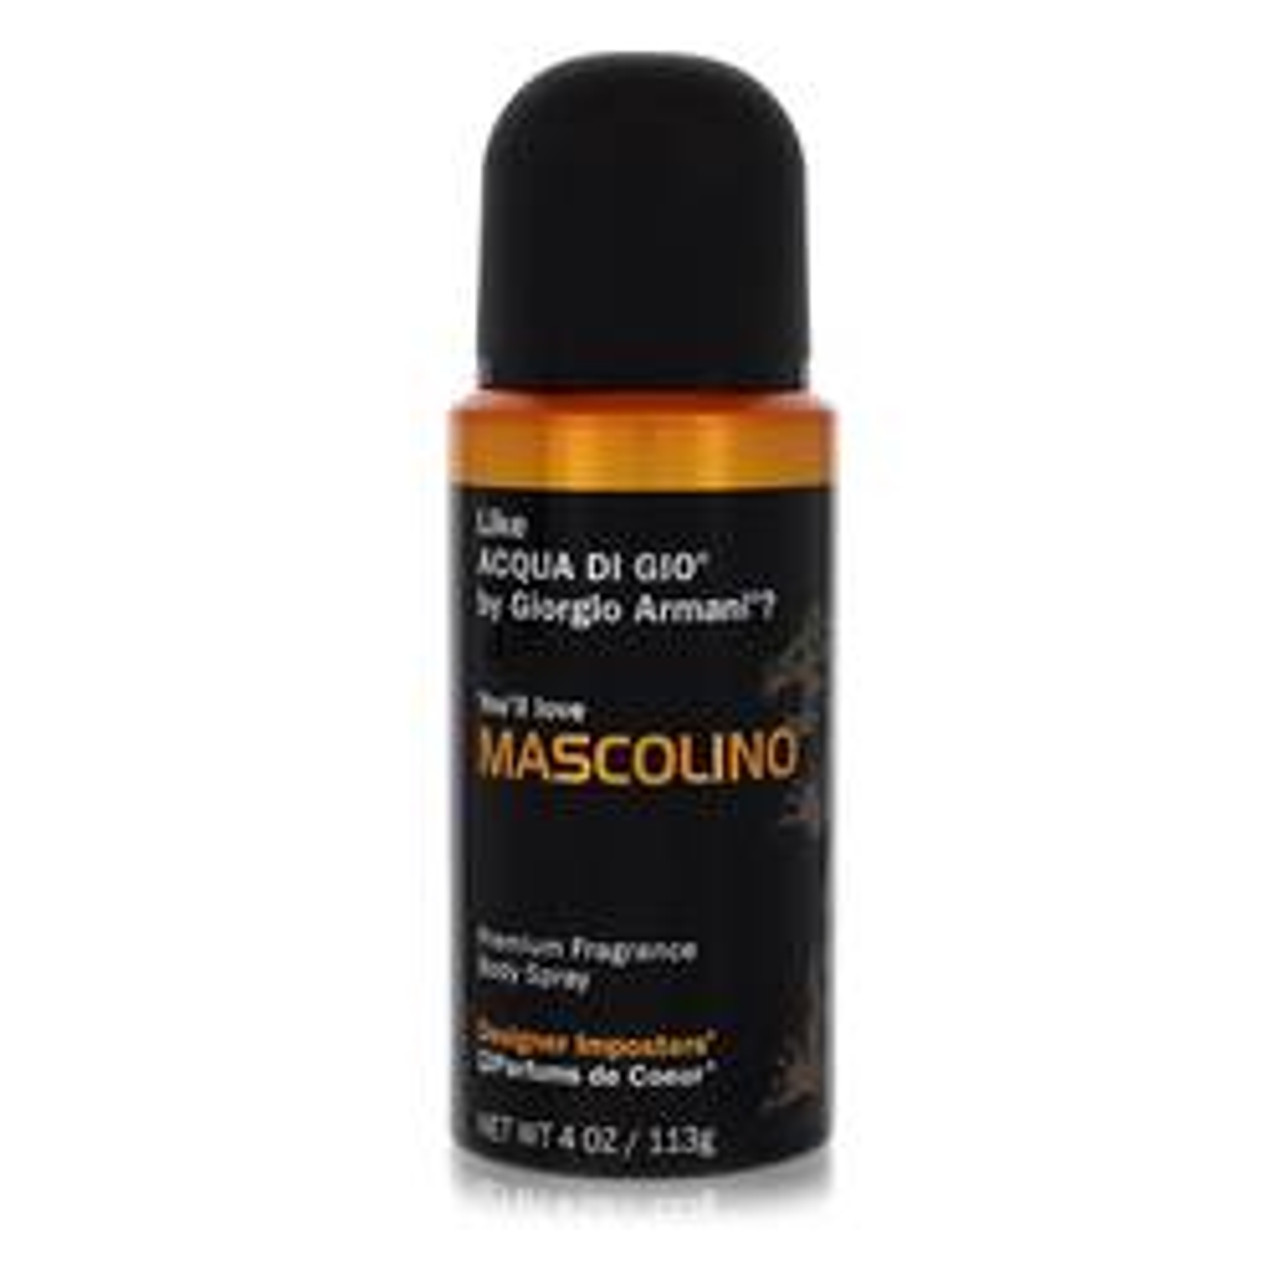 Designer Imposters Mascolino Cologne By Parfums De Coeur Body Spray 4 oz for Men - [From 27.00 - Choose pk Qty ] - *Ships from Miami